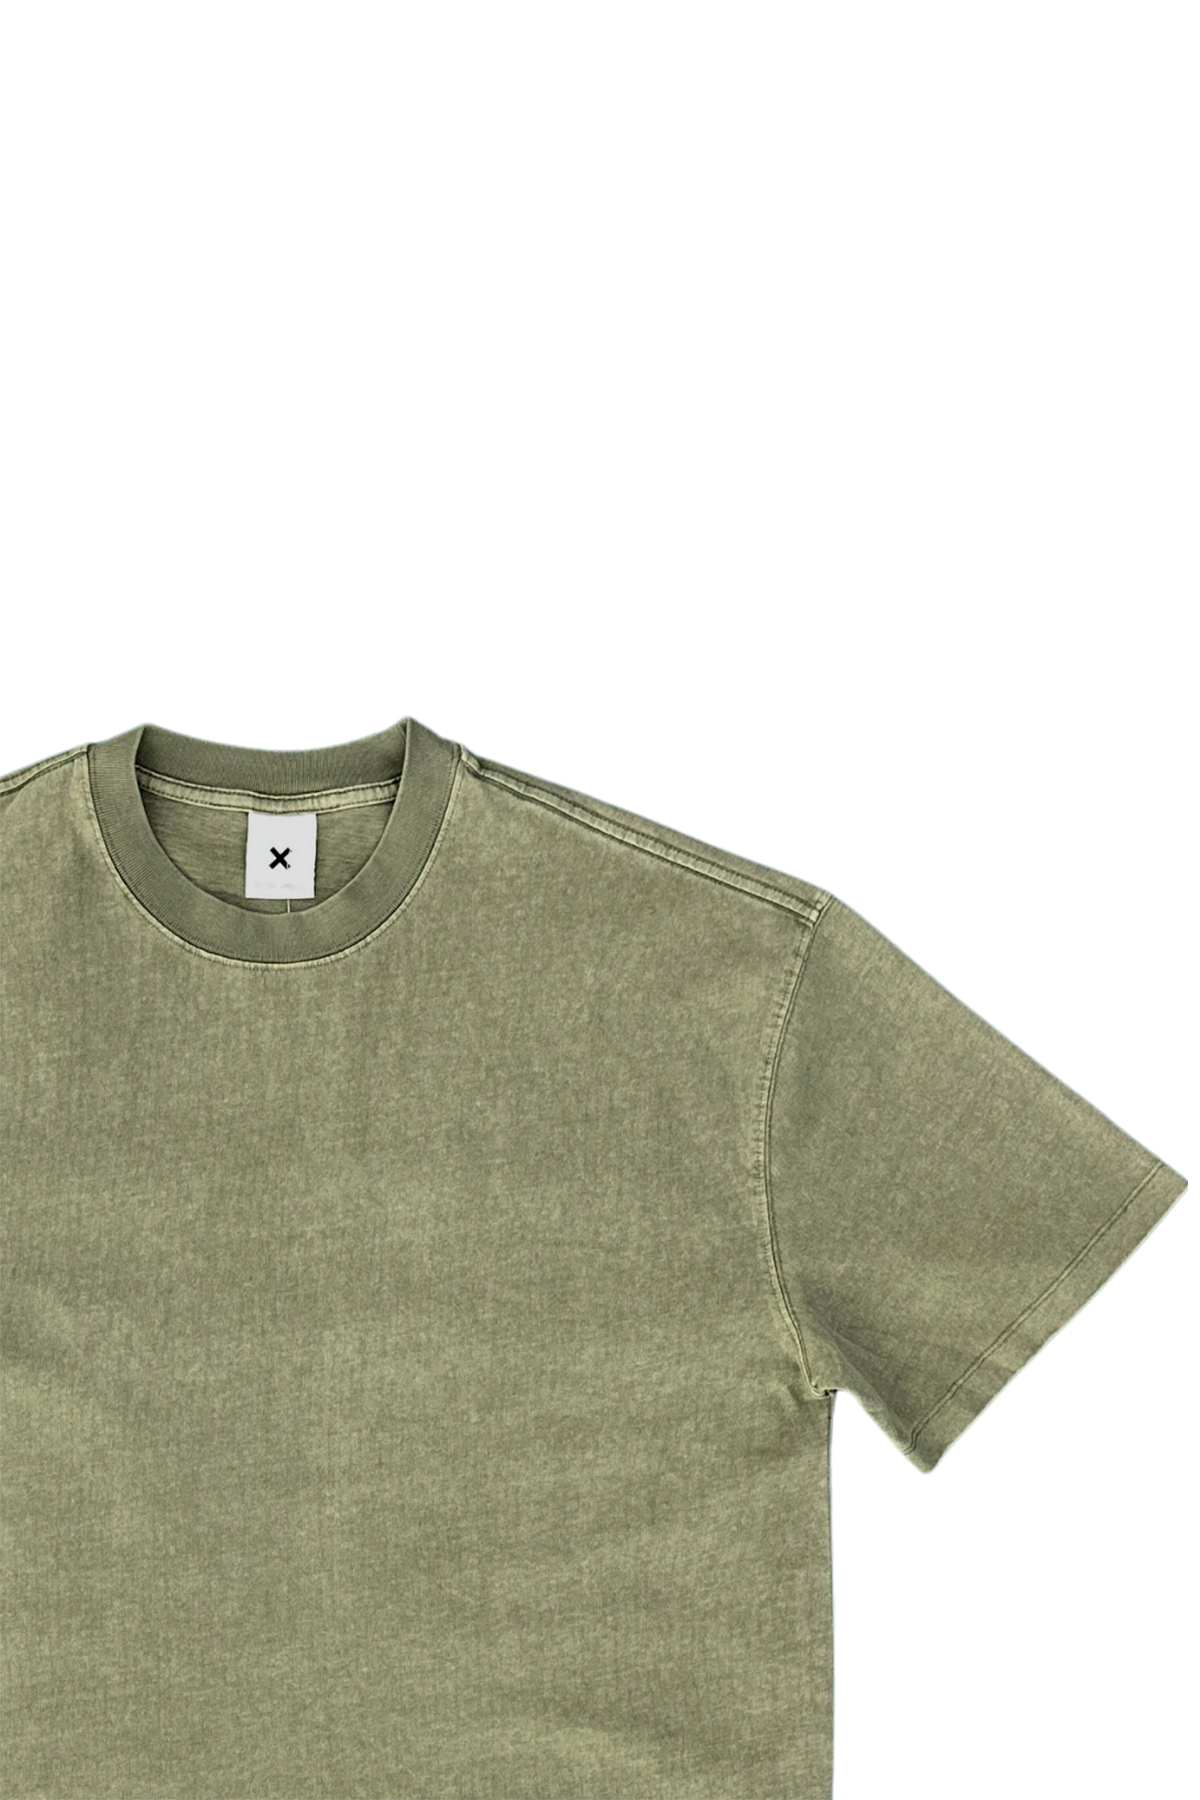 Crew-Neck-Oversized-Tee-Army-Green-side